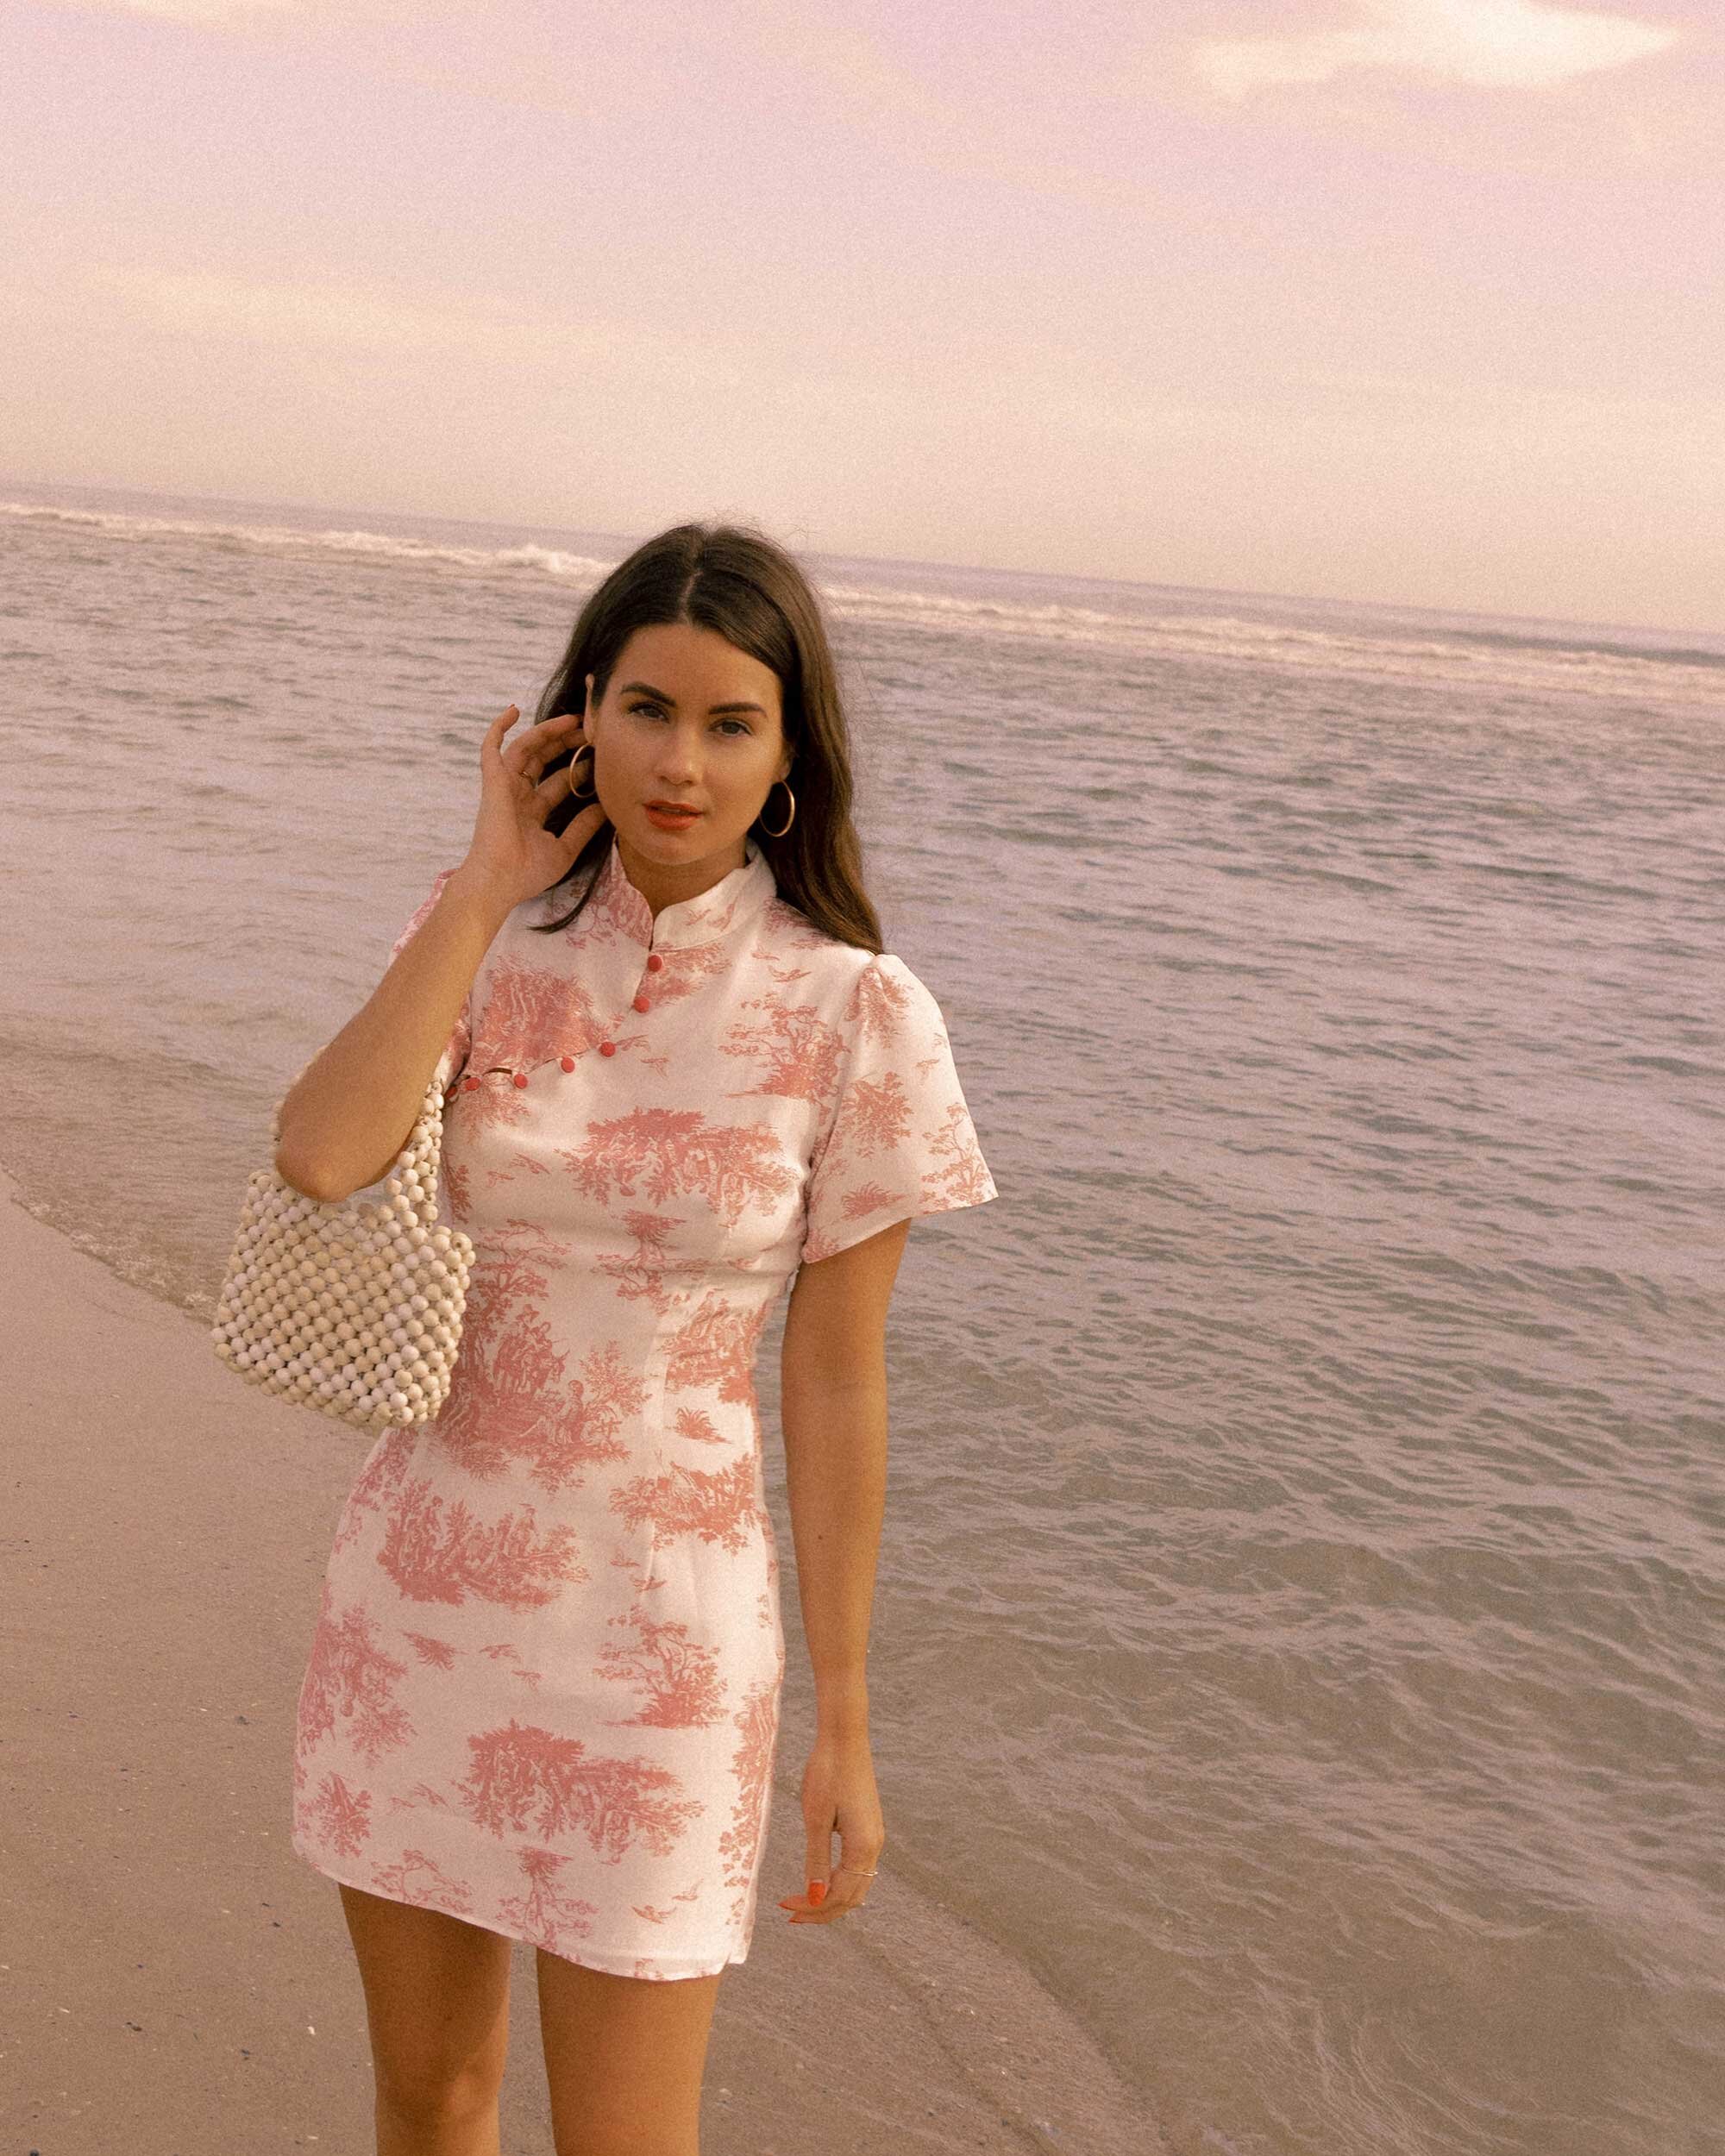 Sarah+Butler+of+Sarah+Styles+Seattle+wears+Stone+Cold+Fox+Lure+Pink+Toile+Print+Mini+Dress+in+Newport+Beach,+California+for+the+perfect+spring+outfit+|+@sarahchristine.jpg